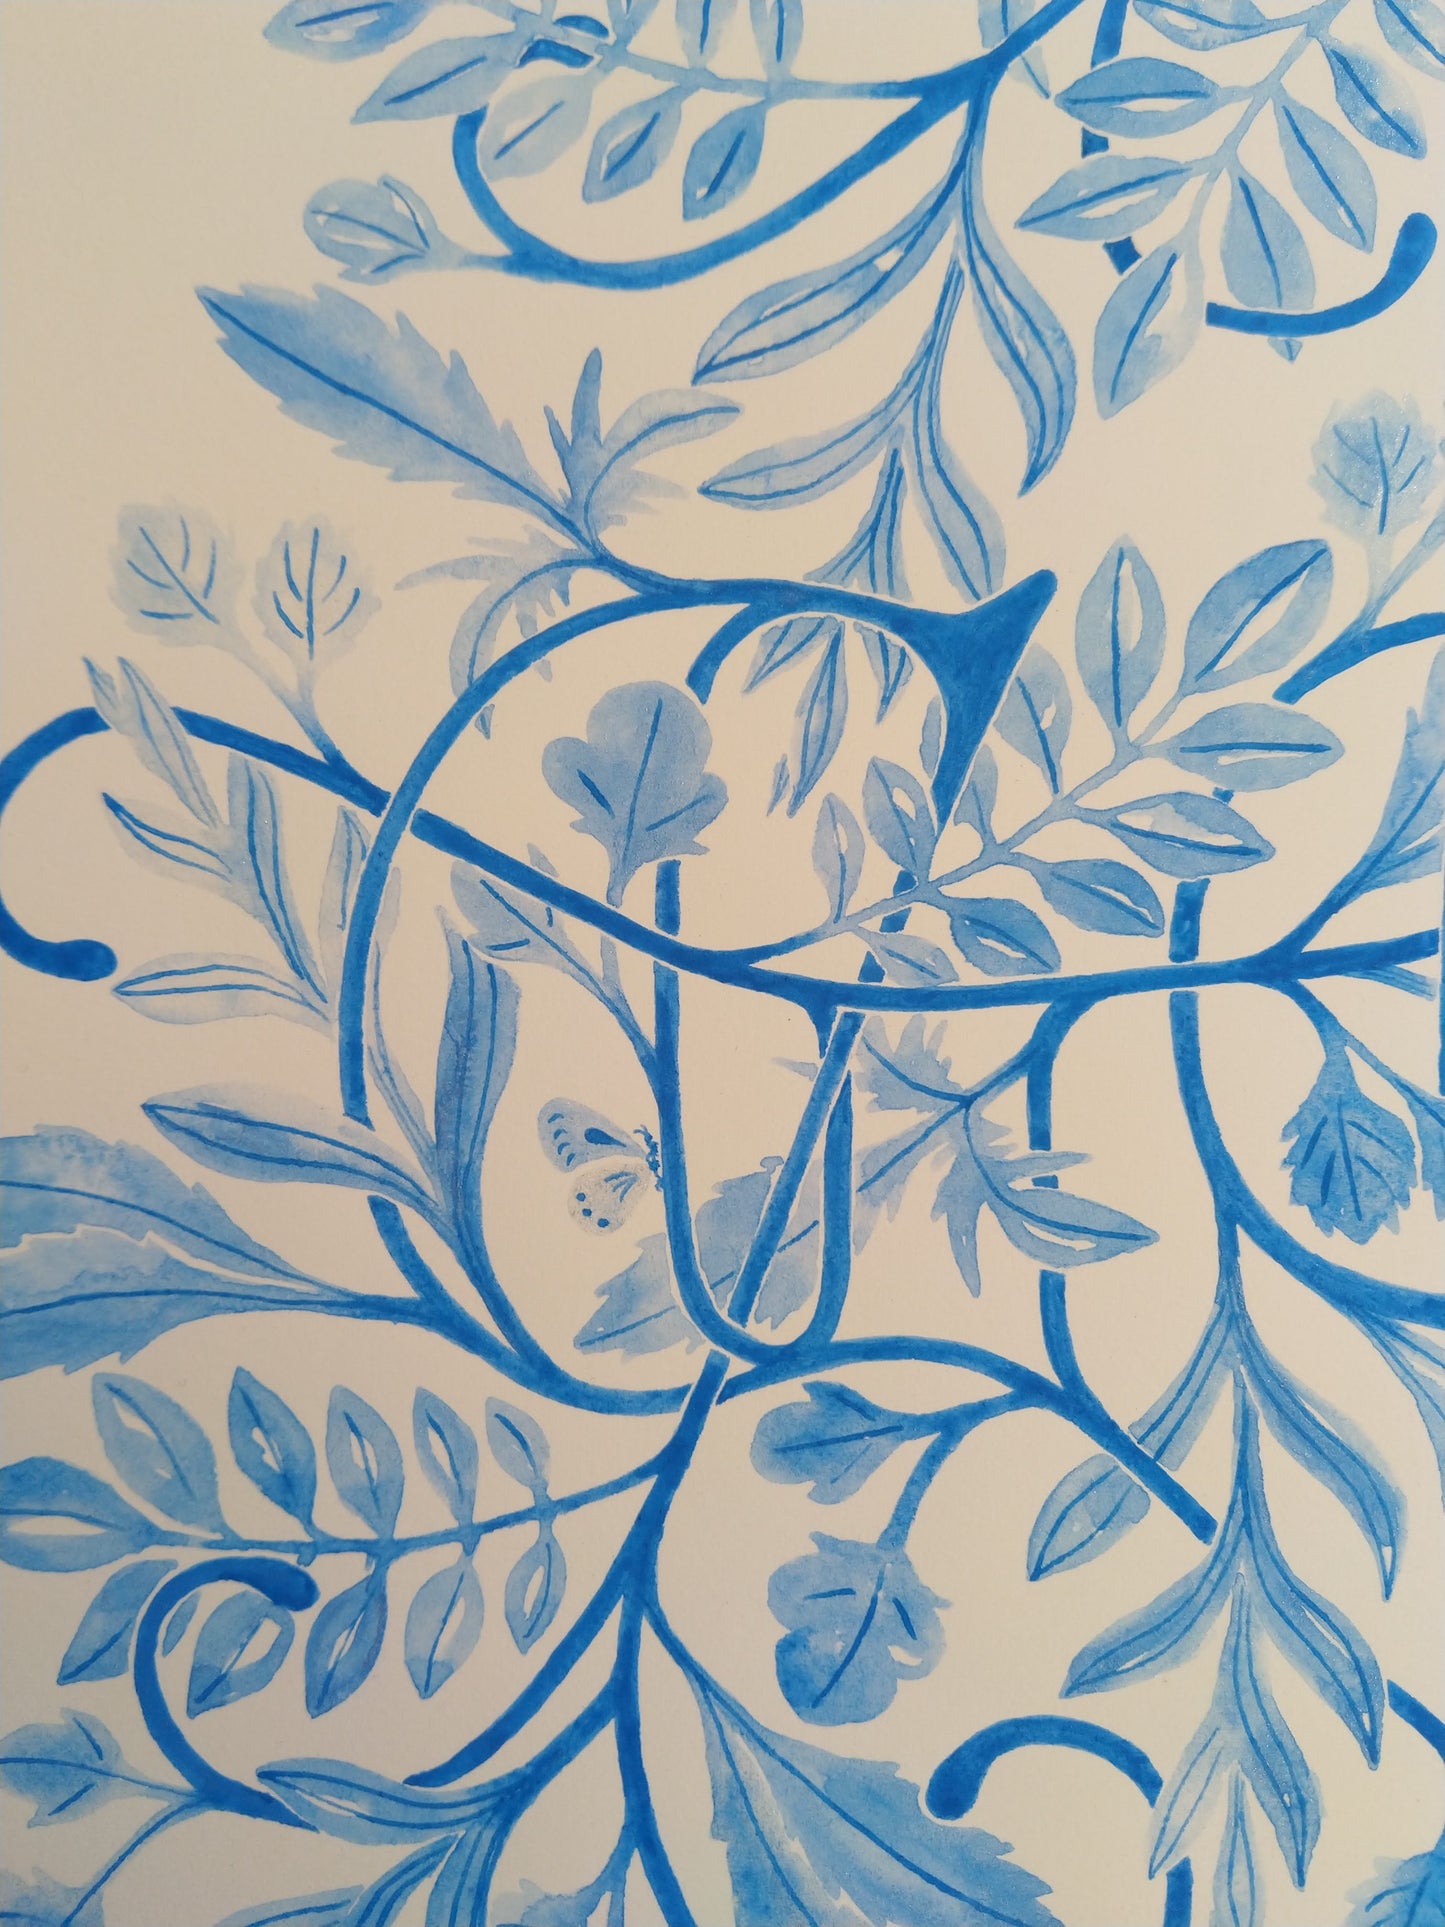 Watercolour Print - Goodness. A study in Cerulean